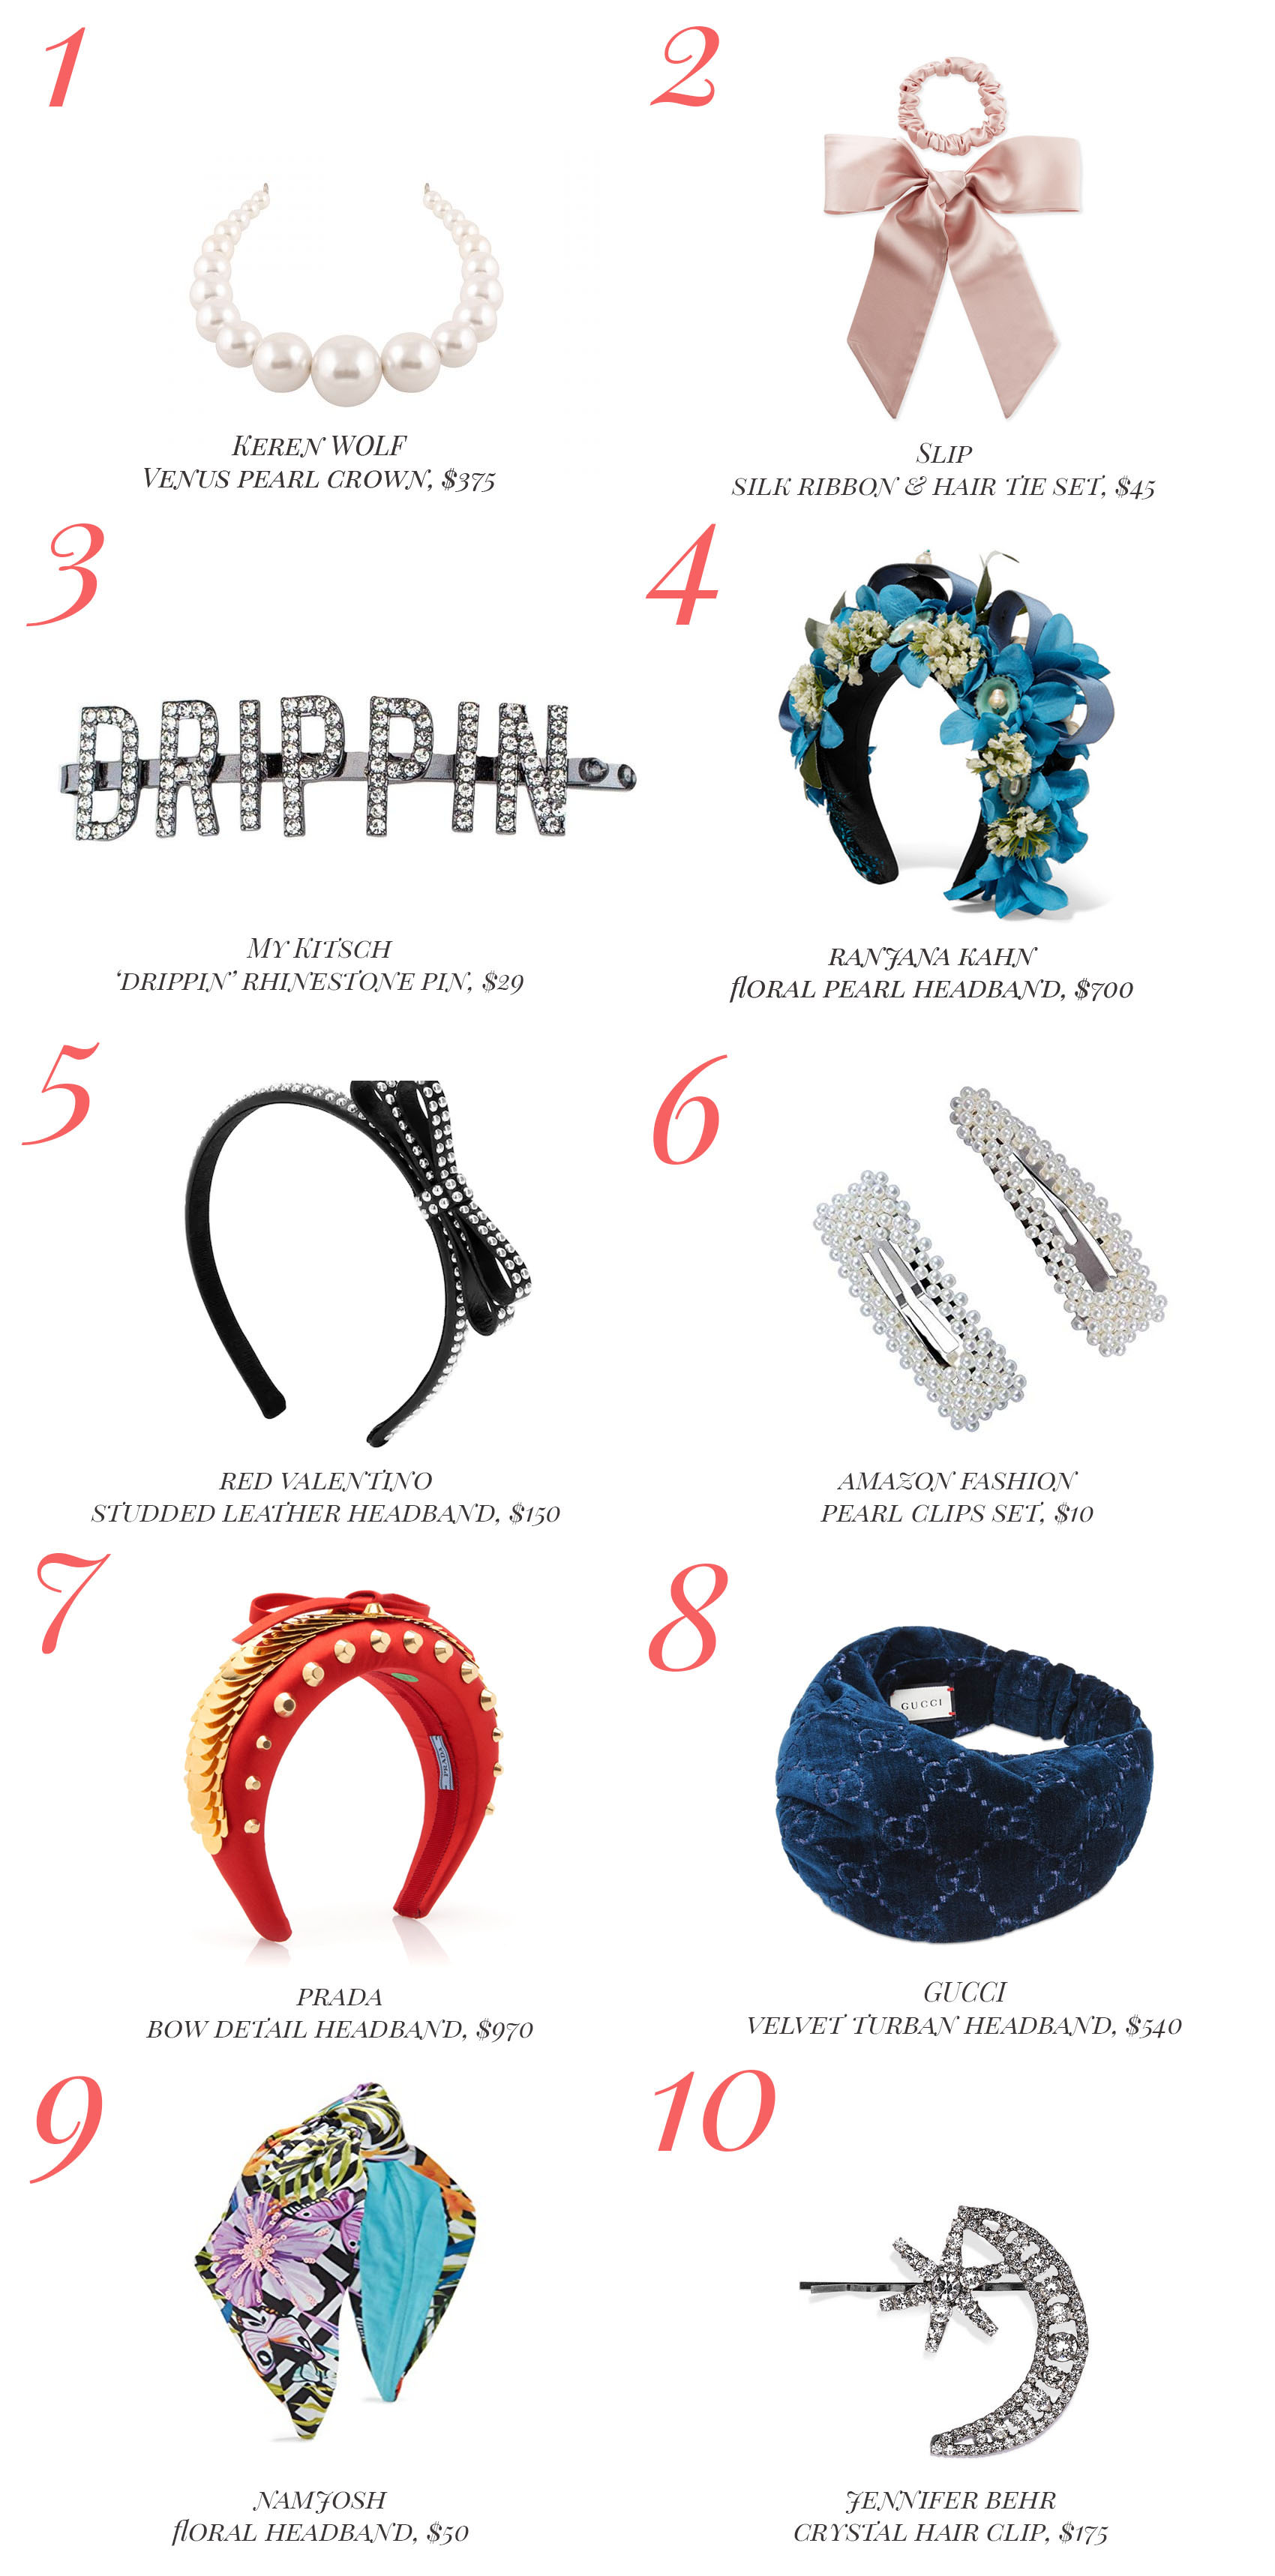 10 Hair Accessories to Wear This Spring